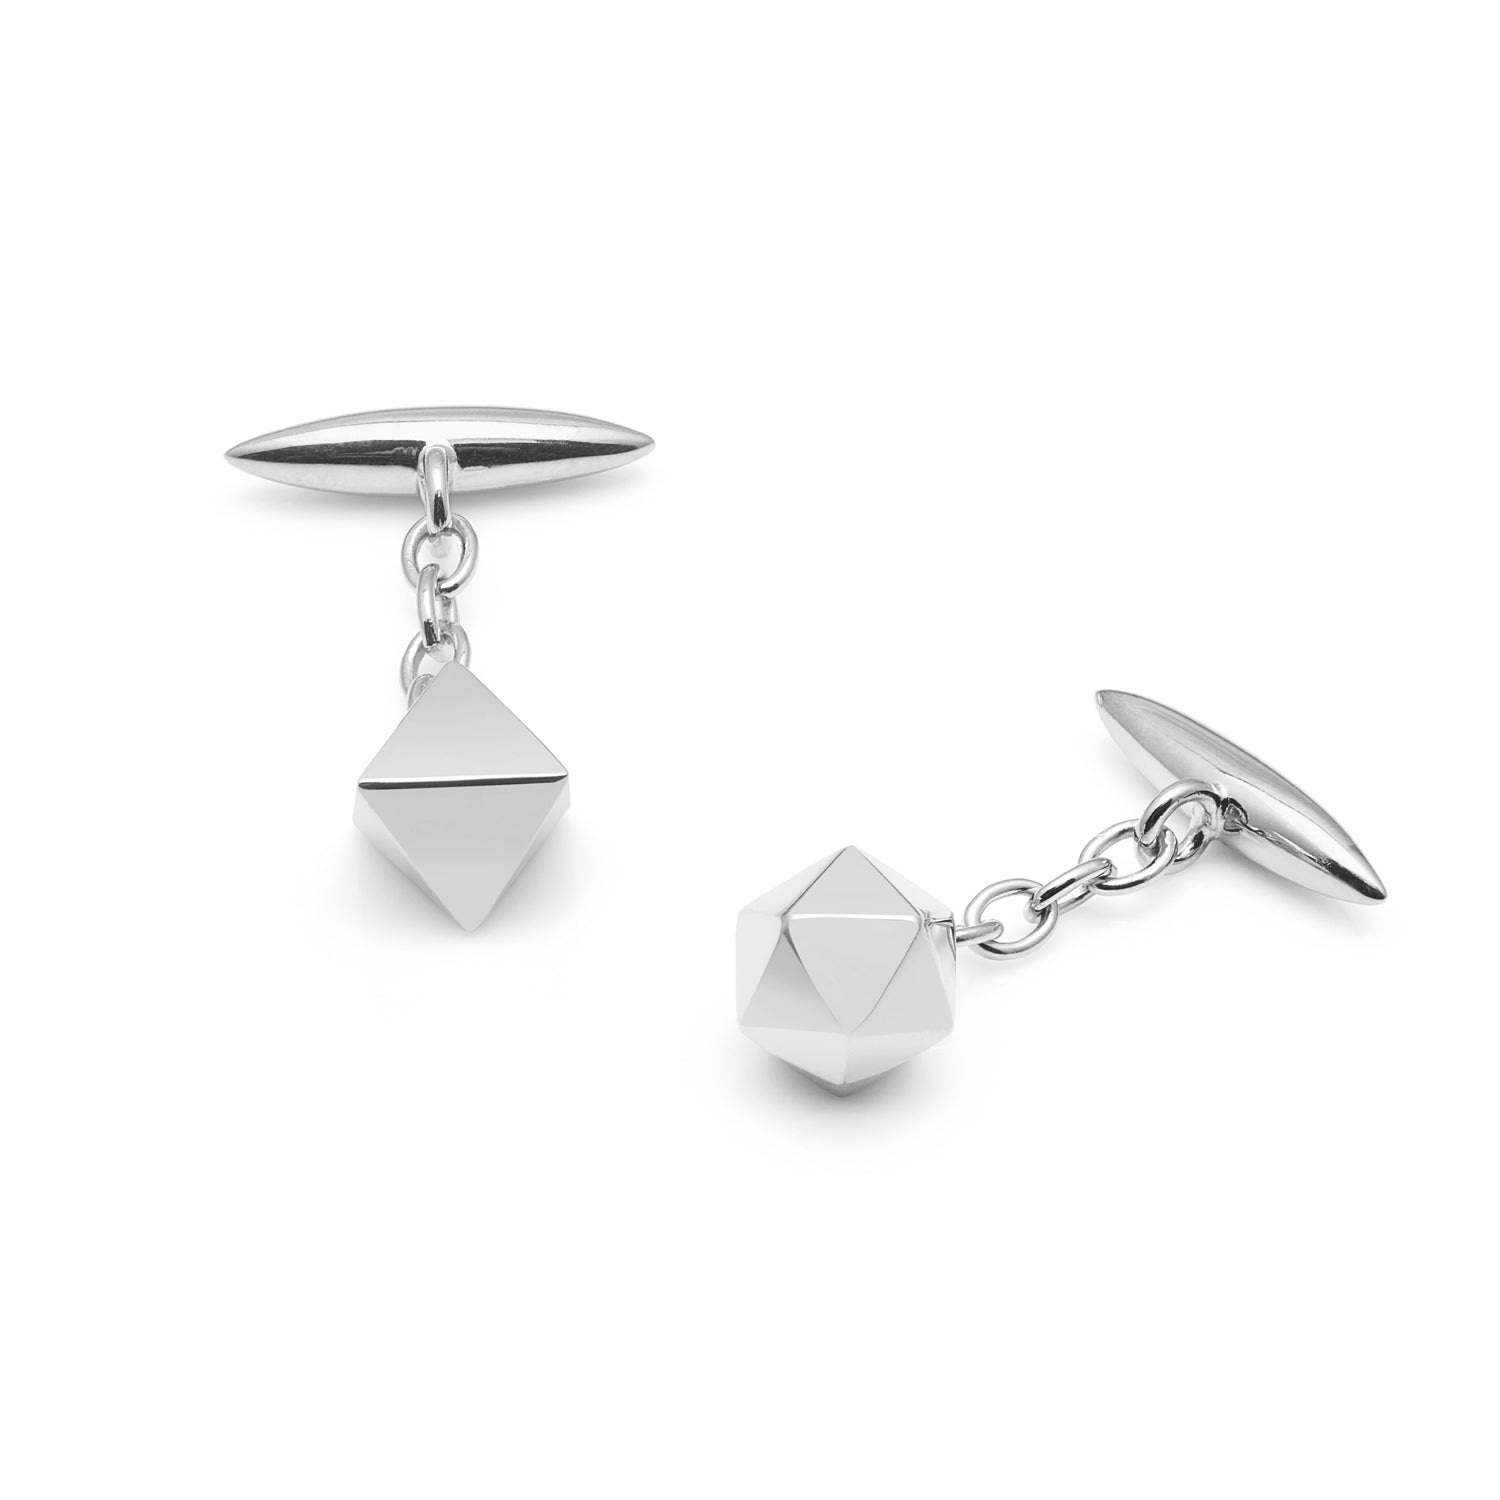 Mismatched Platonic Solid Cufflinks - Silver